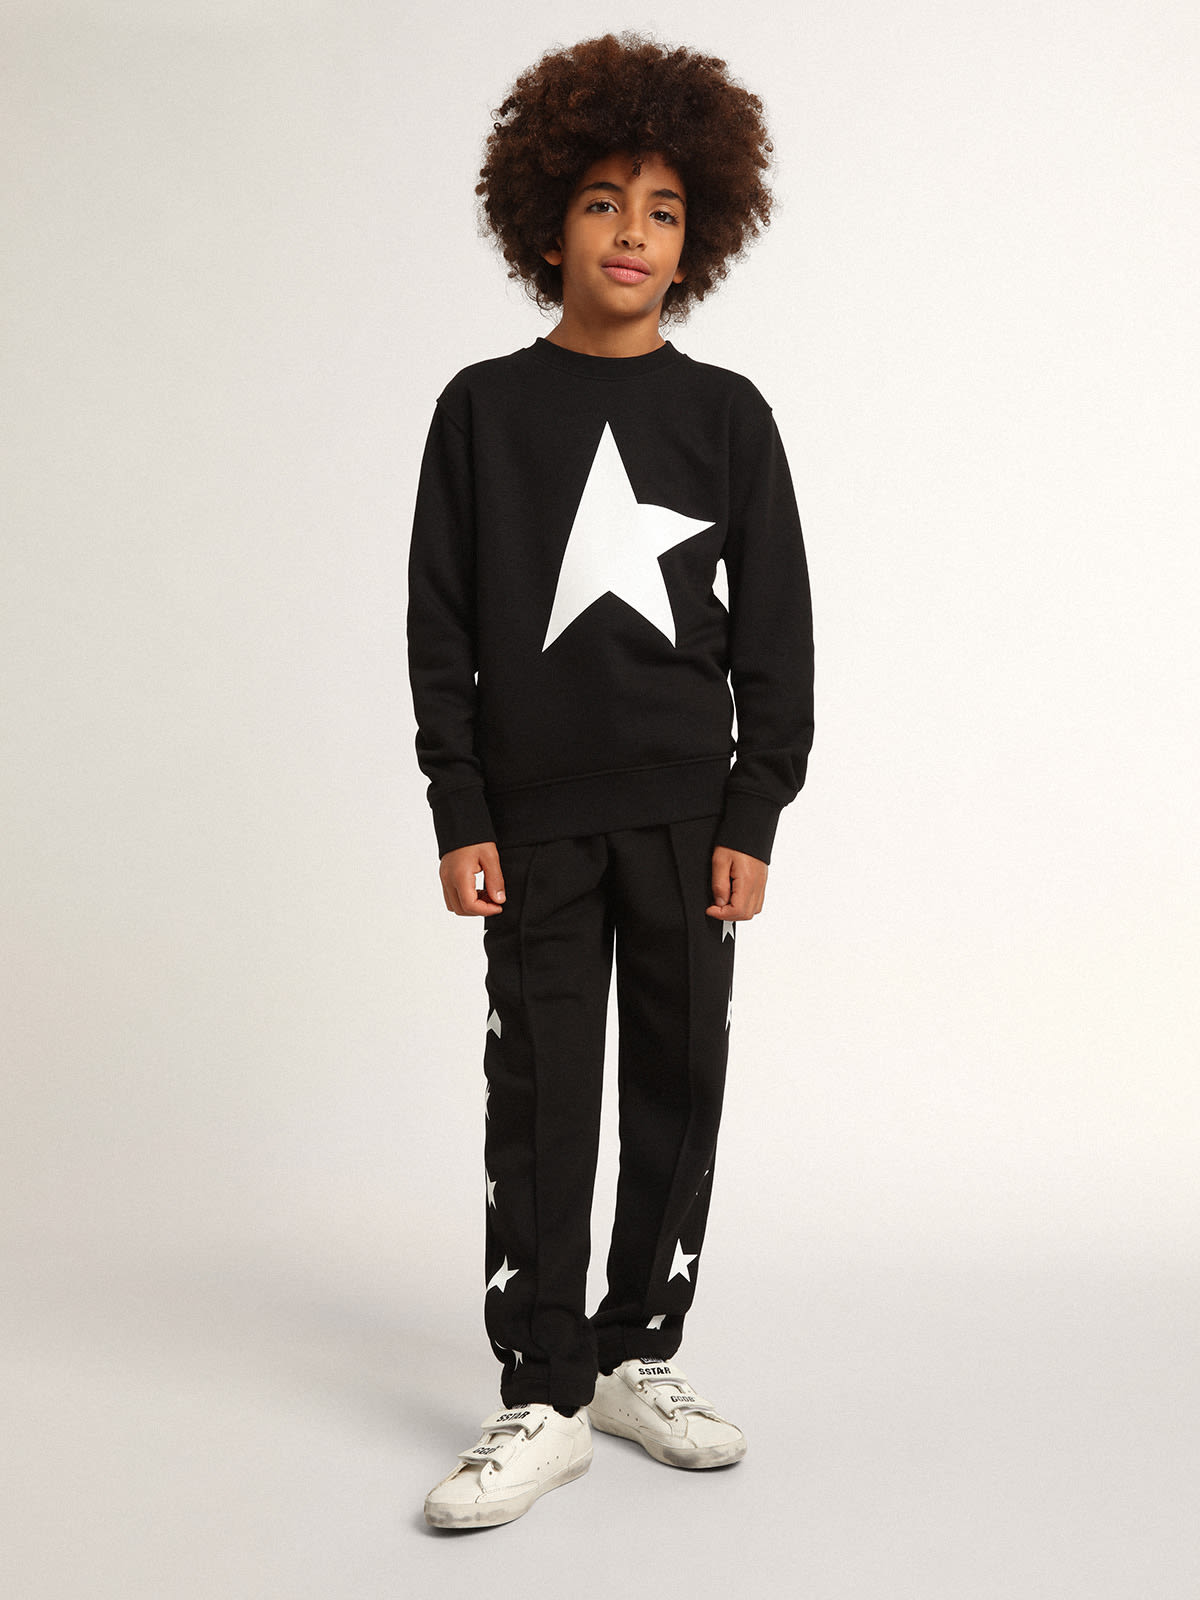 Golden Goose - Black sweatshirt with white maxi star on the front in 